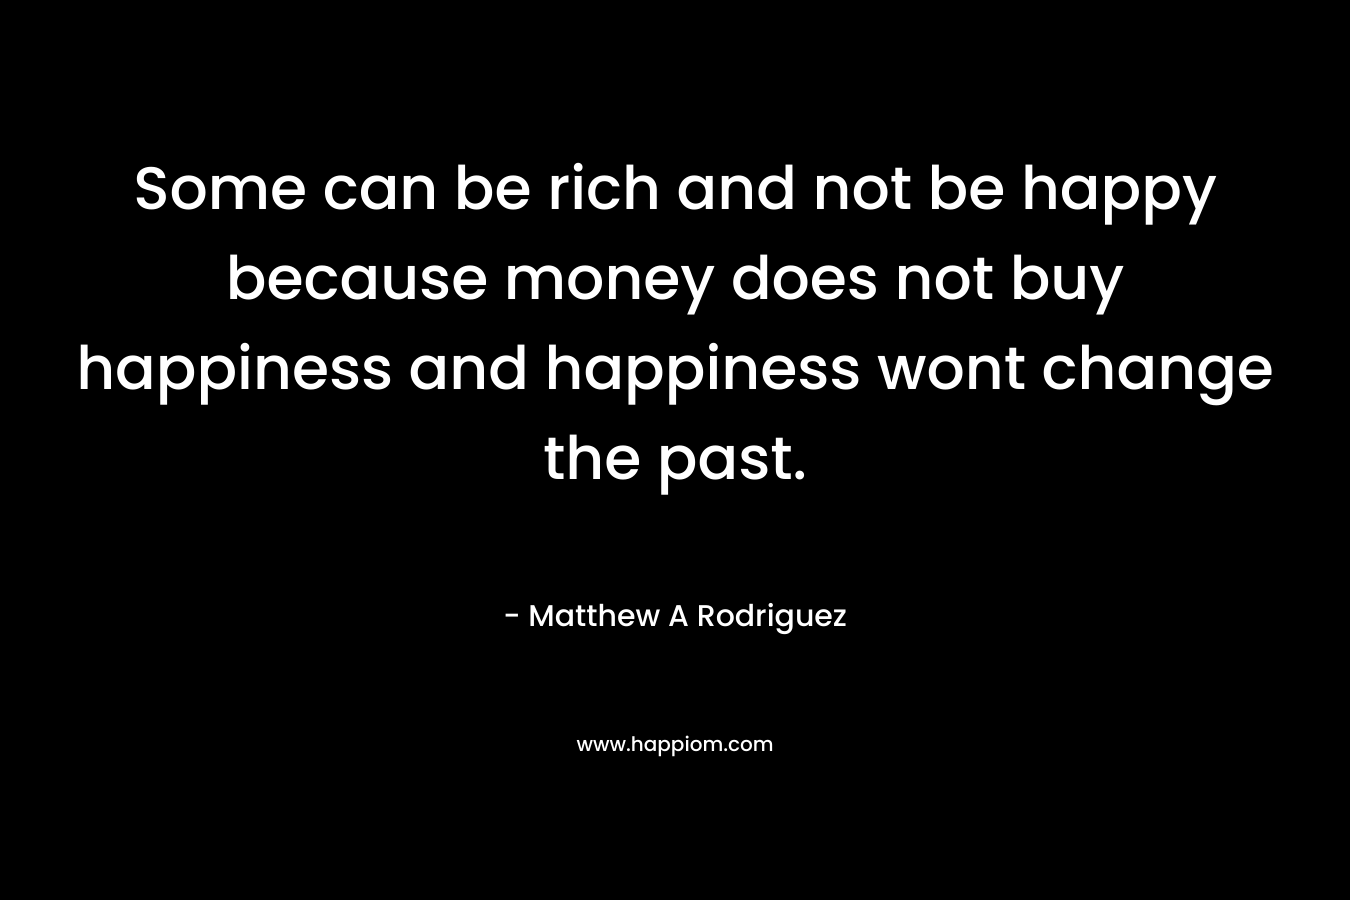 Some can be rich and not be happy because money does not buy happiness and happiness wont change the past. – Matthew A Rodriguez